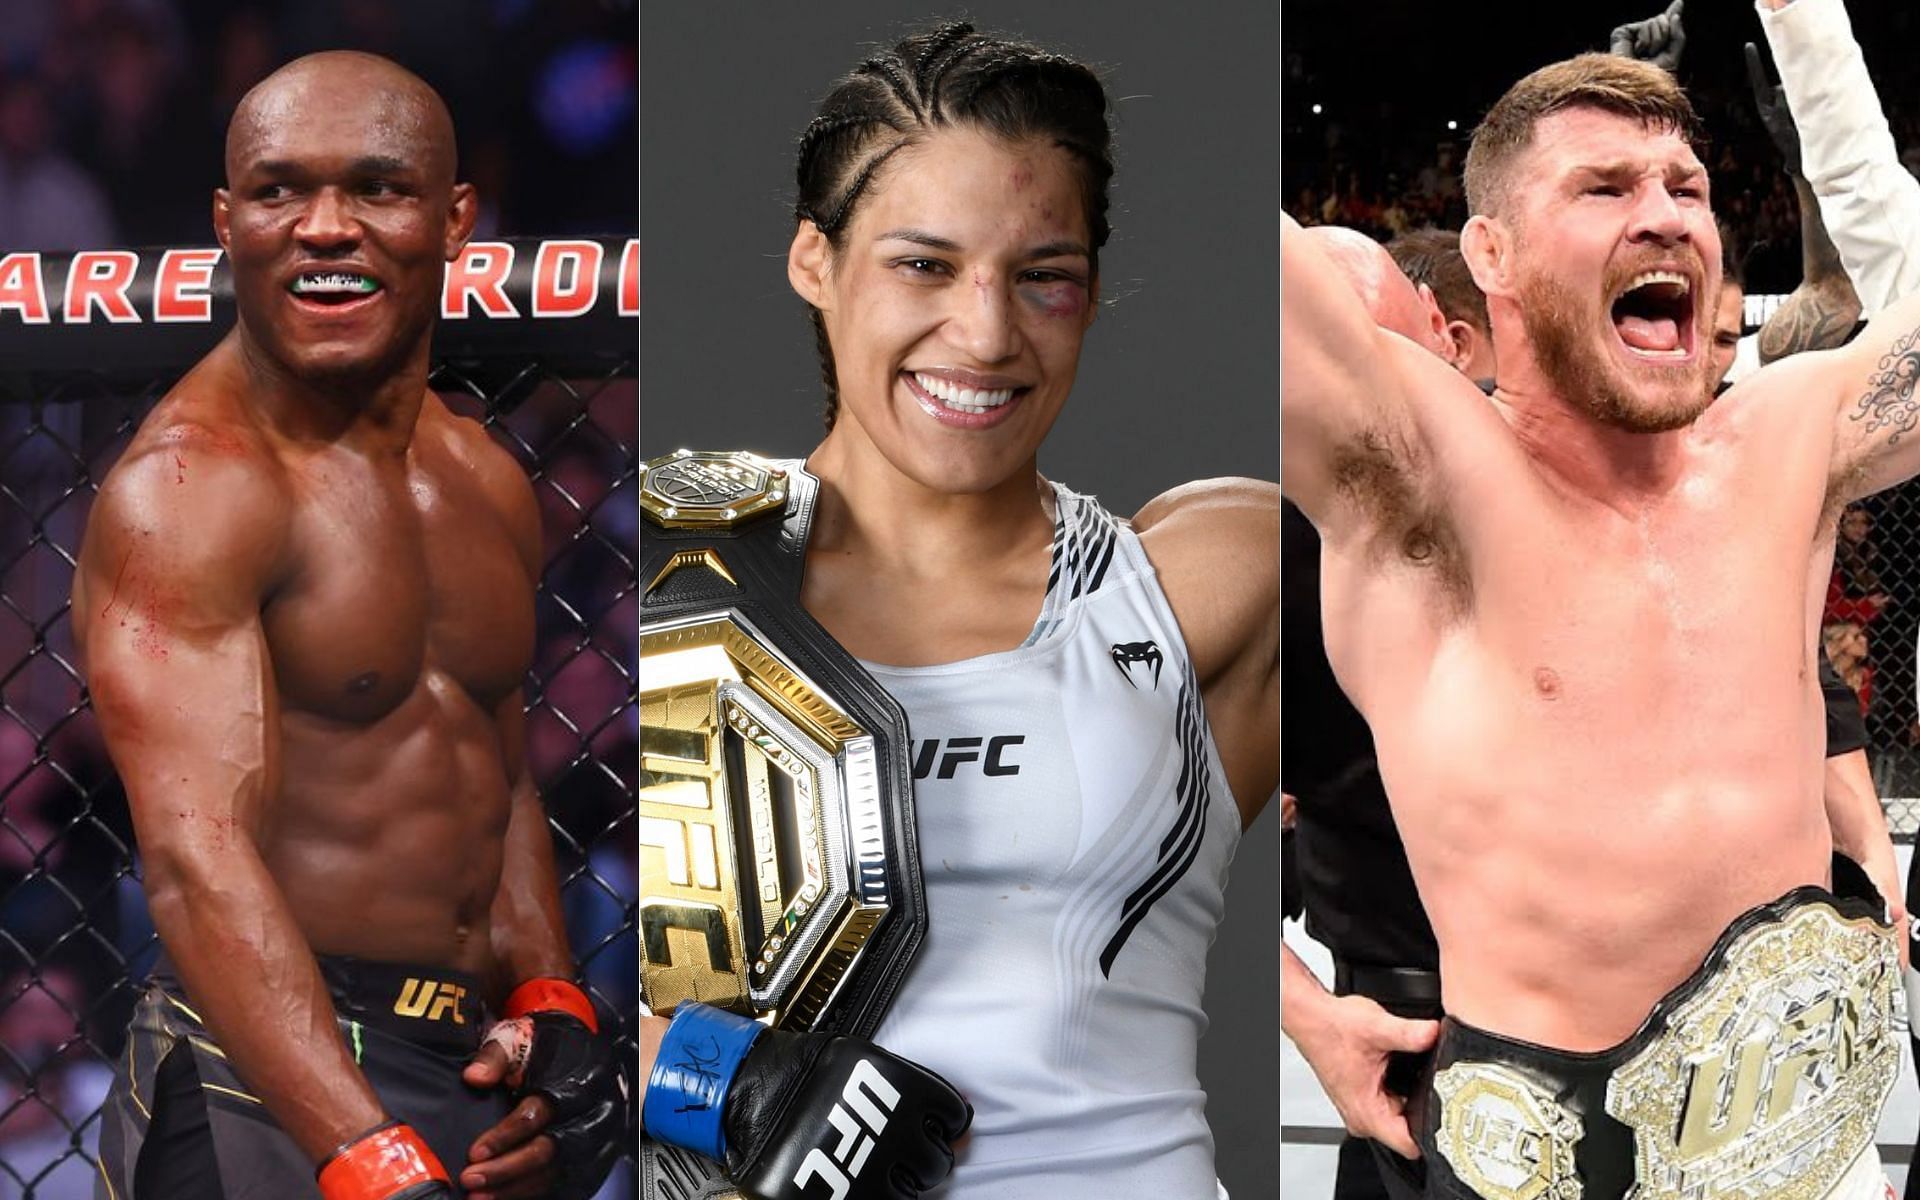 Kamaru Usman (left), Julianna Pena (centre) and Michael Bisping (right) were all TUF champions